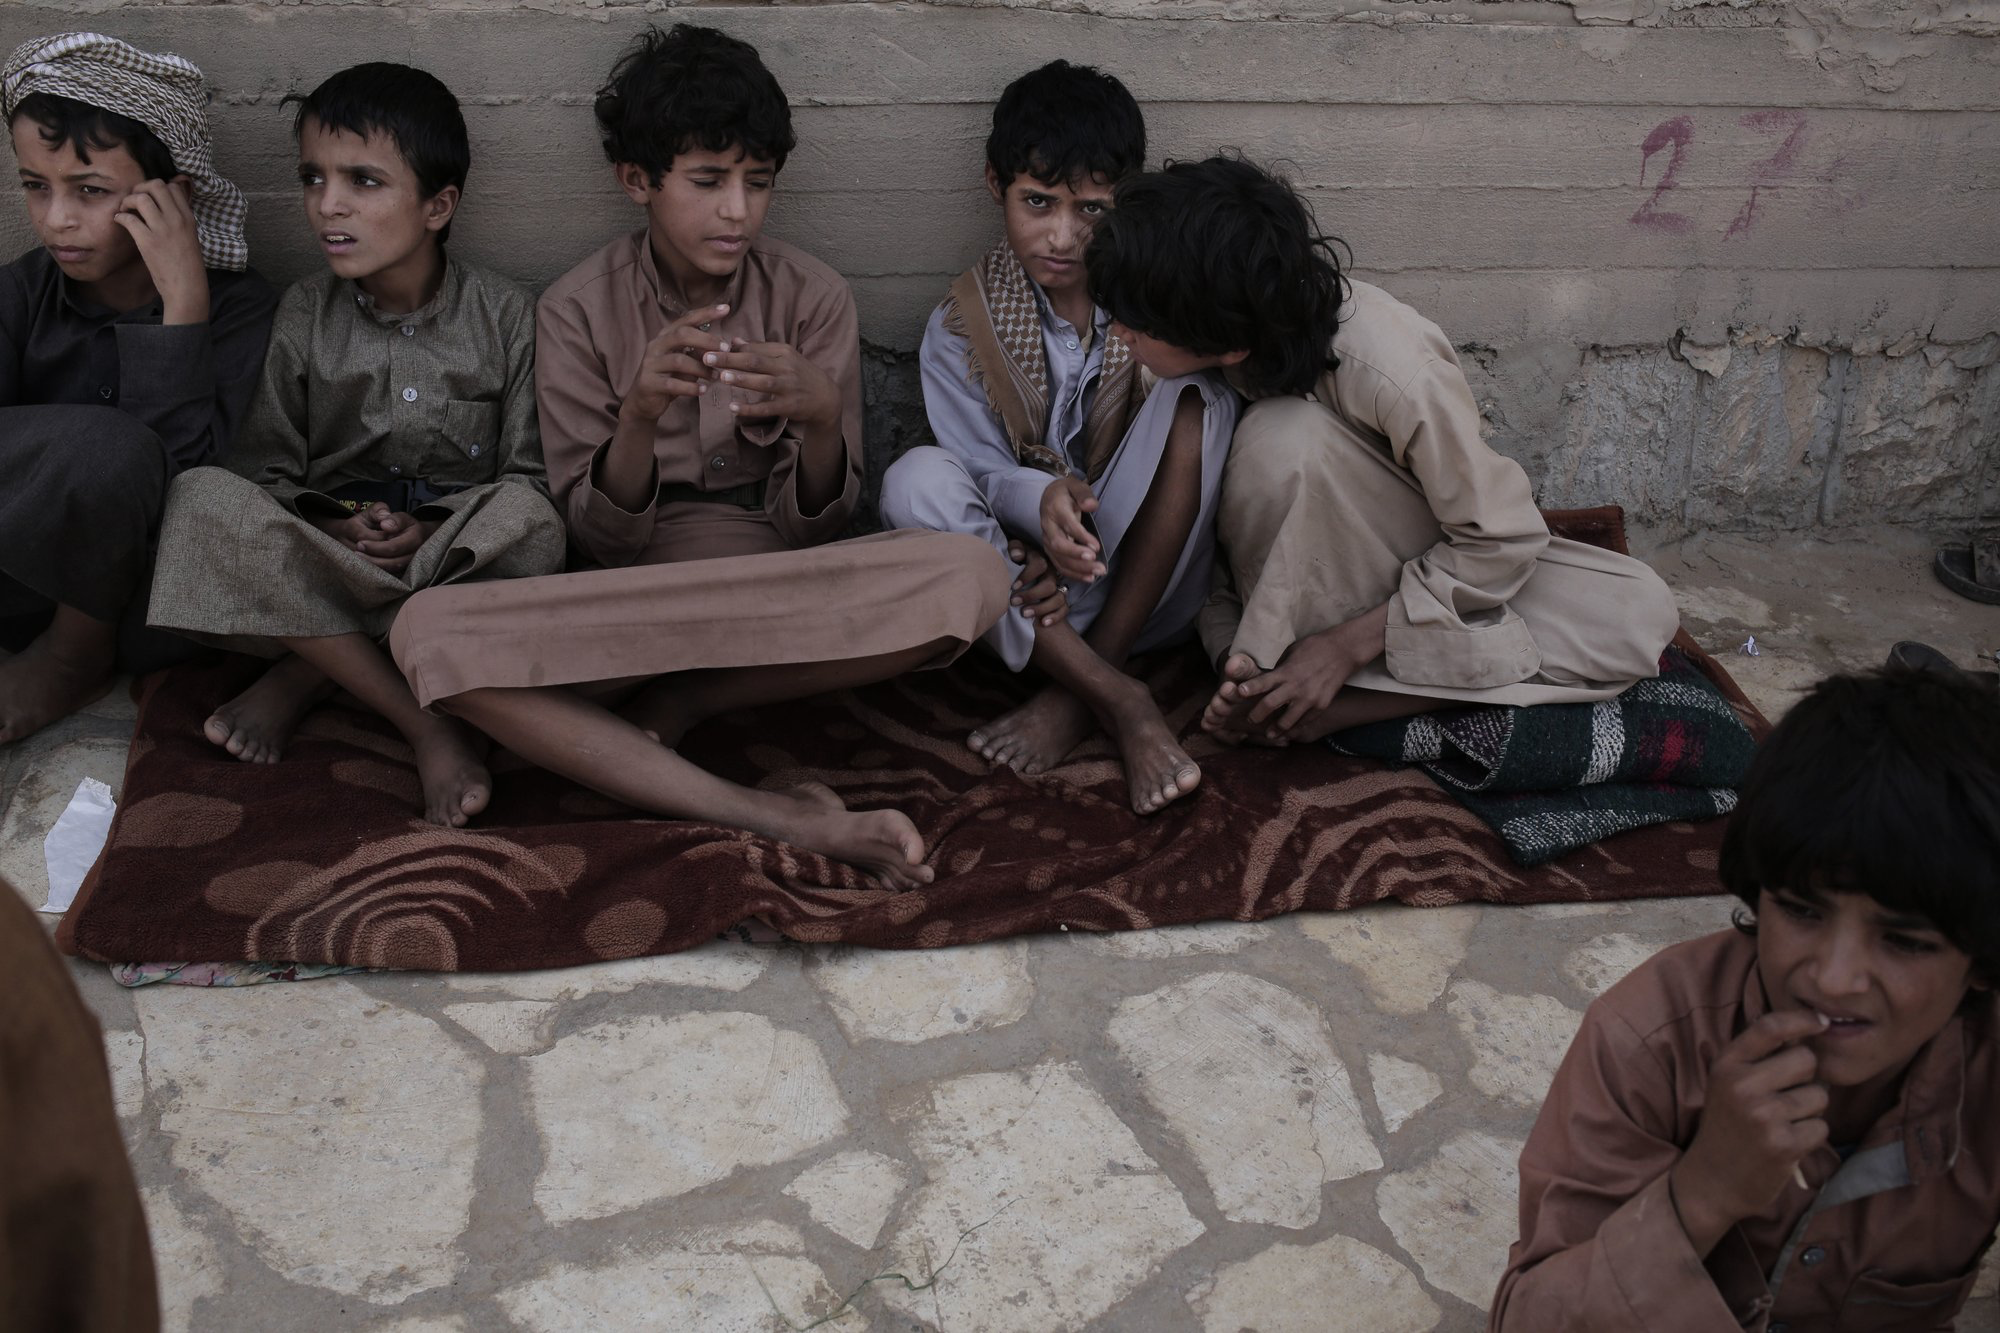 In this July 27, 2018 photo, 14-year-old Abdel Habid, second right, and 14-year-old Morsal, third right, sit at a camp for displaced persons where they took shelter in Marib, Yemen. Both boys were child soldiers forcibly enlisted by Houthi rebels and put to work carrying ammunition and supplies to the front lines. Abdel-Hamid says he saw children get shot for disobeying orders. Morsal suffered partial hearing loss from explosions and airstrikes. Image by Nariman El-Mofty / AP News. Yemen, 2018.